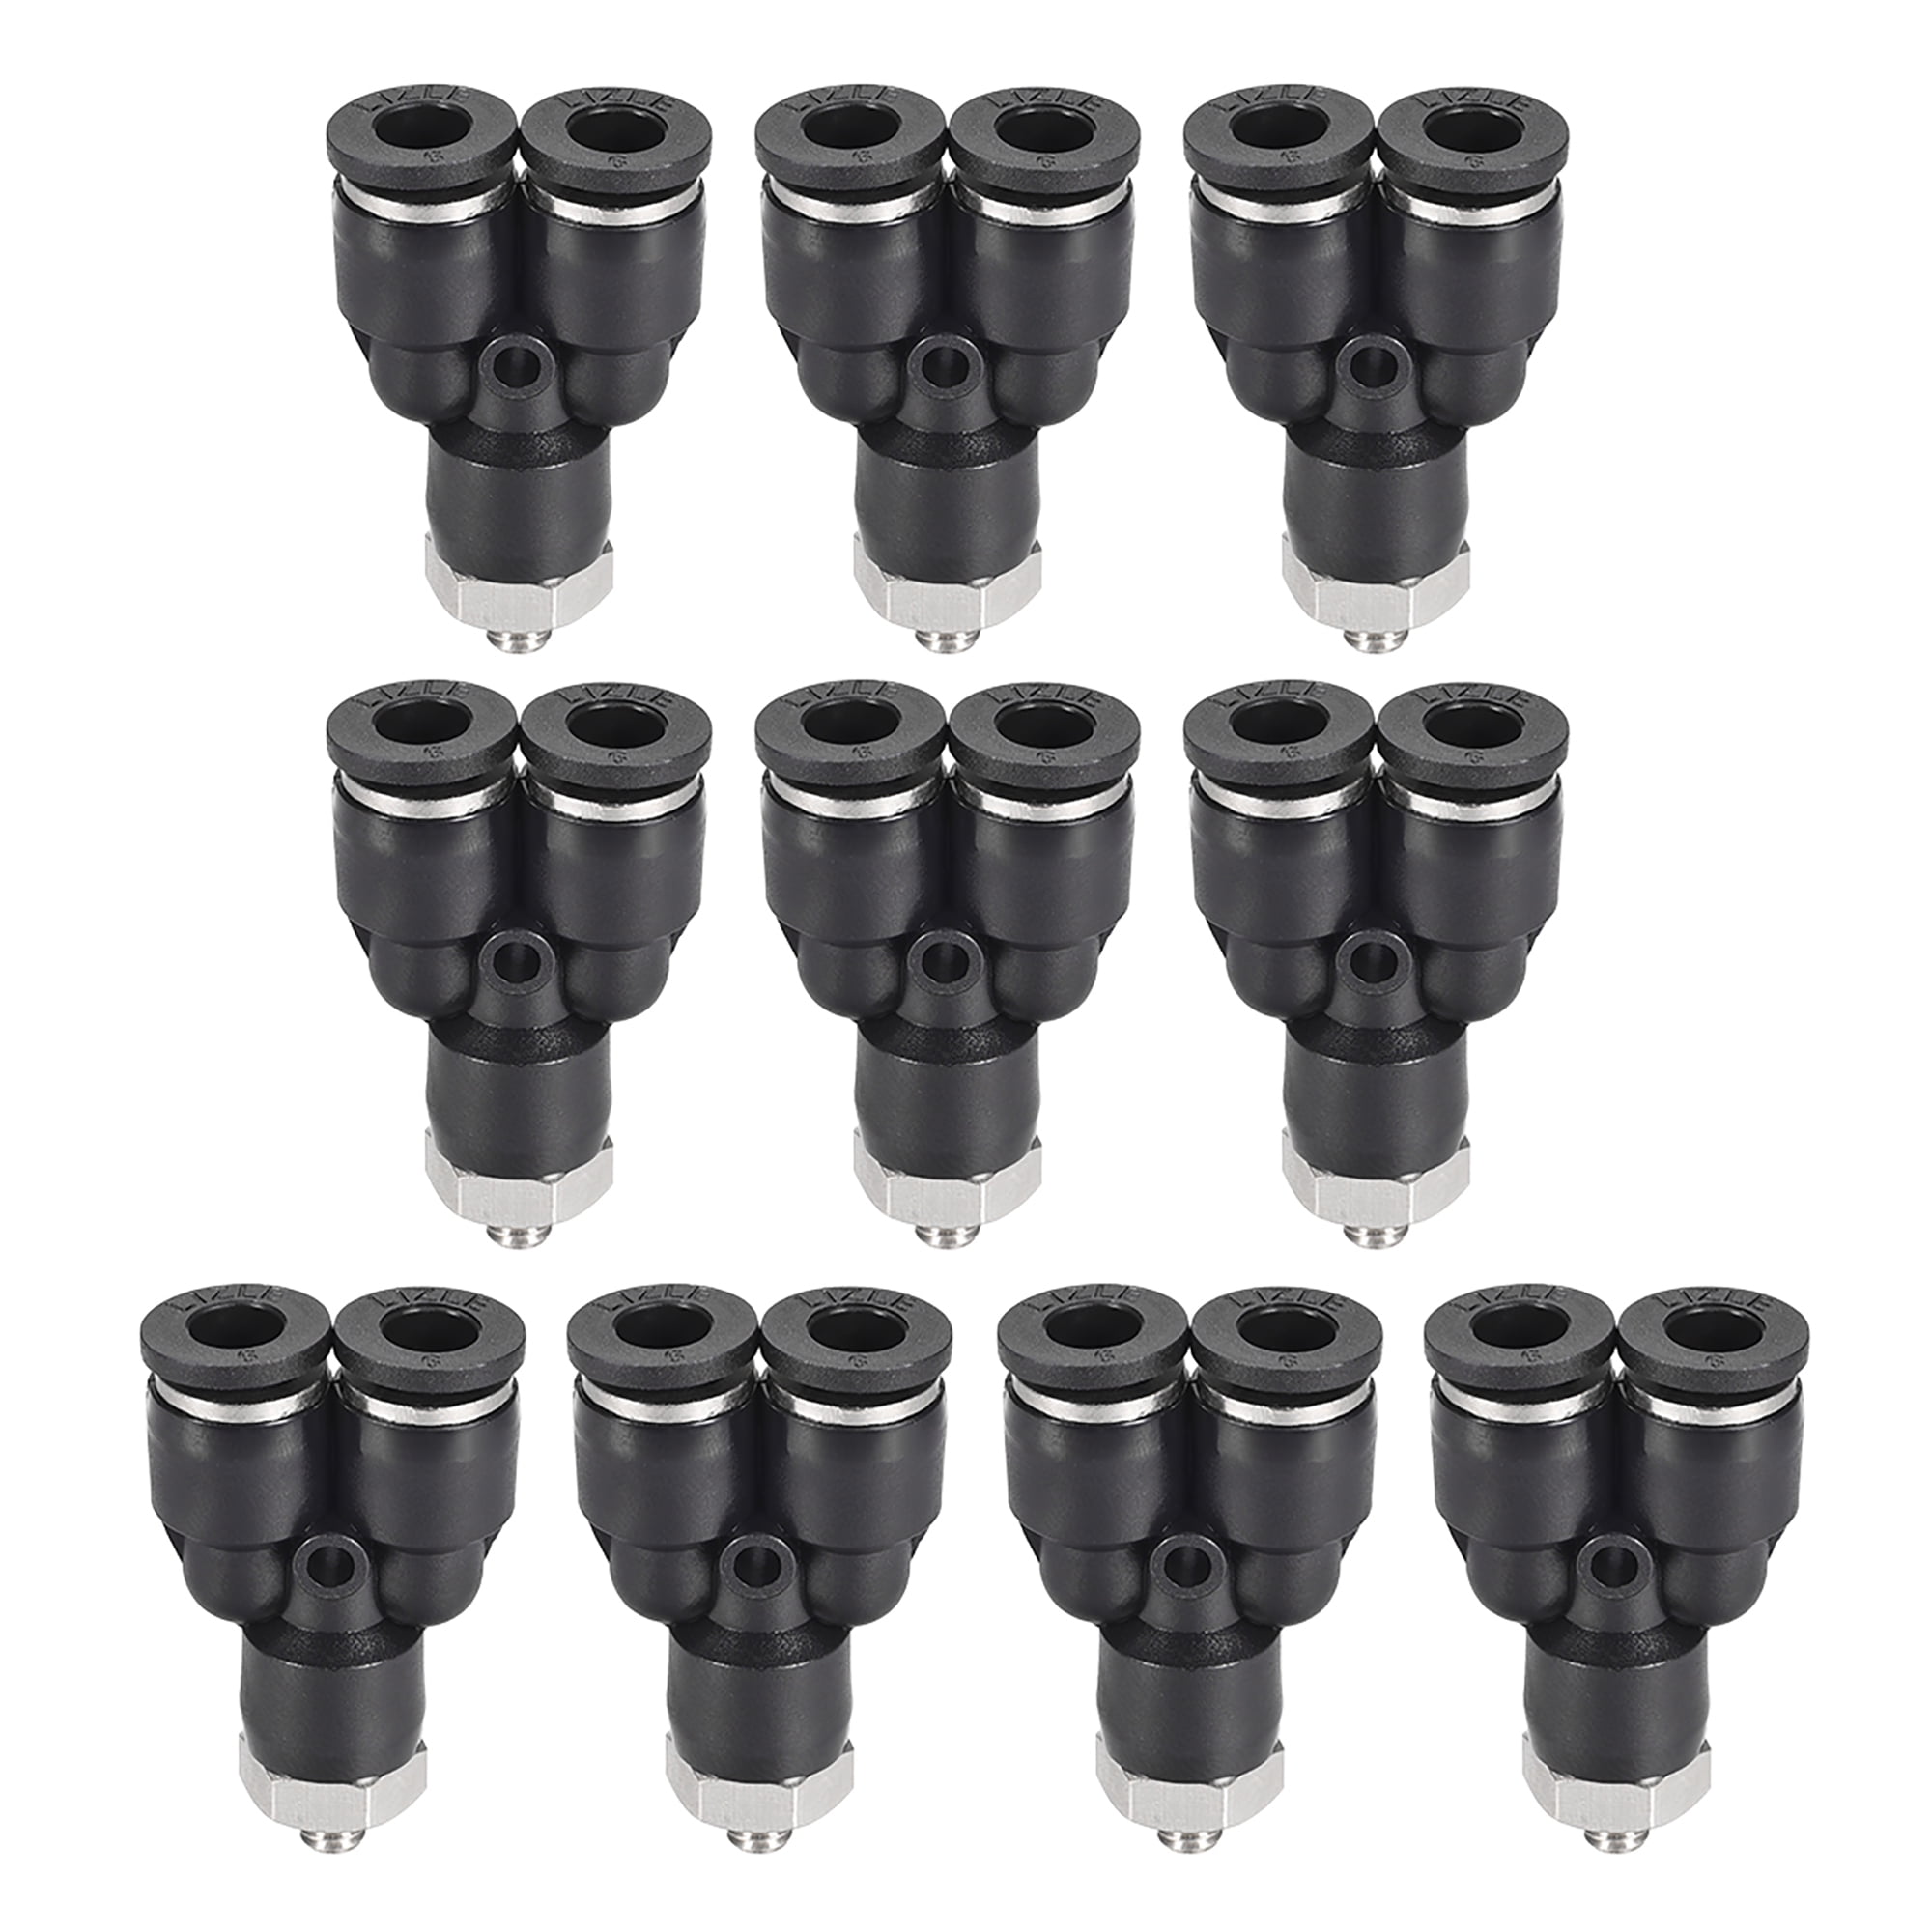 Zrong 10Pcs 6mm to 1/4 Thread Male Straight Pneumatic Tube Push in Quick Connect Fittings Pipe 